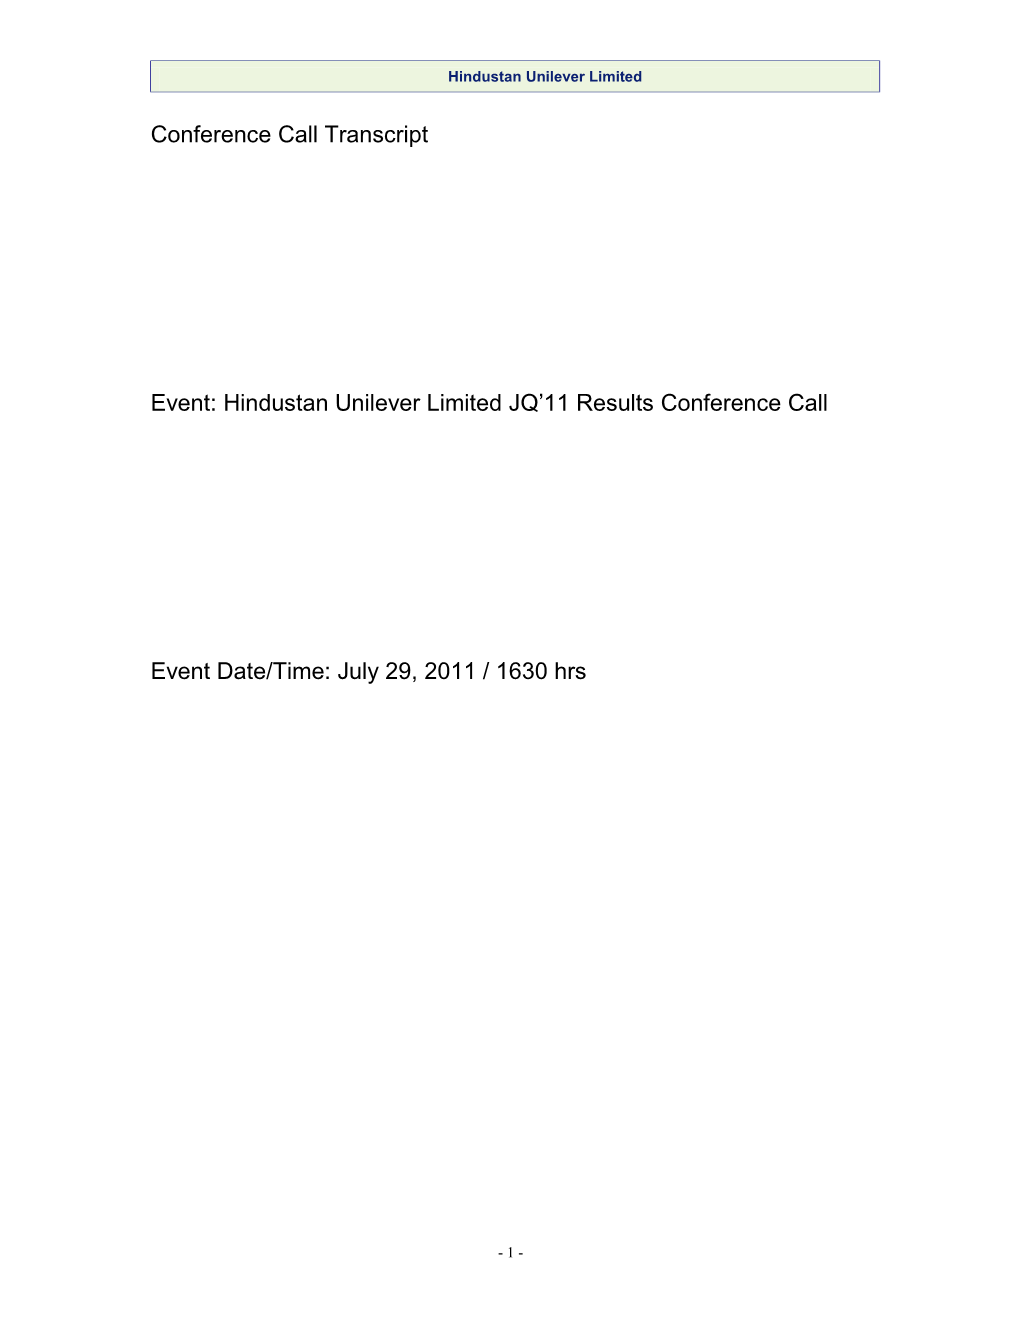 Transcript of Sonata Software Limited Conference Call